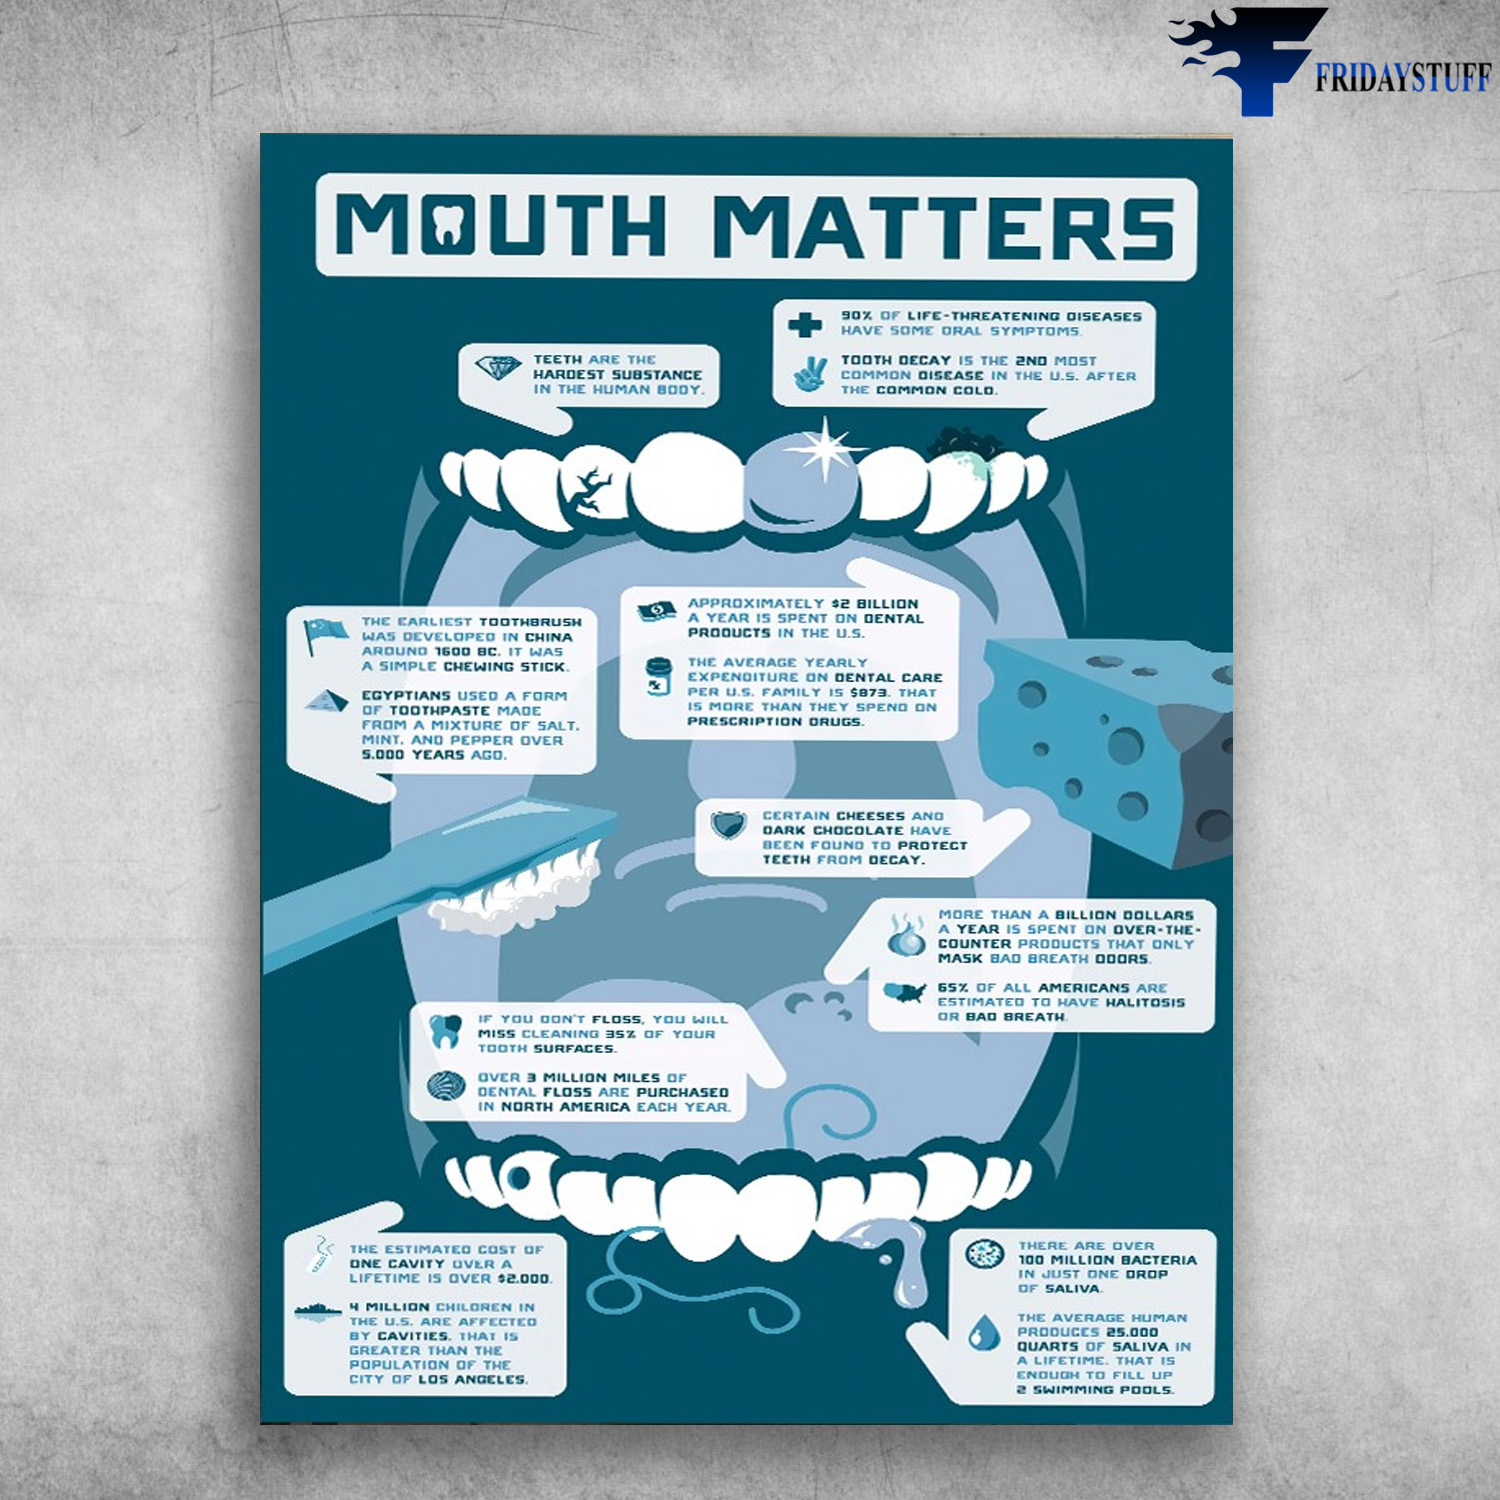 Mouth Matters, Teeth Care, Dentist Poster - Teeth Are The Hardest Substance In The Human Body